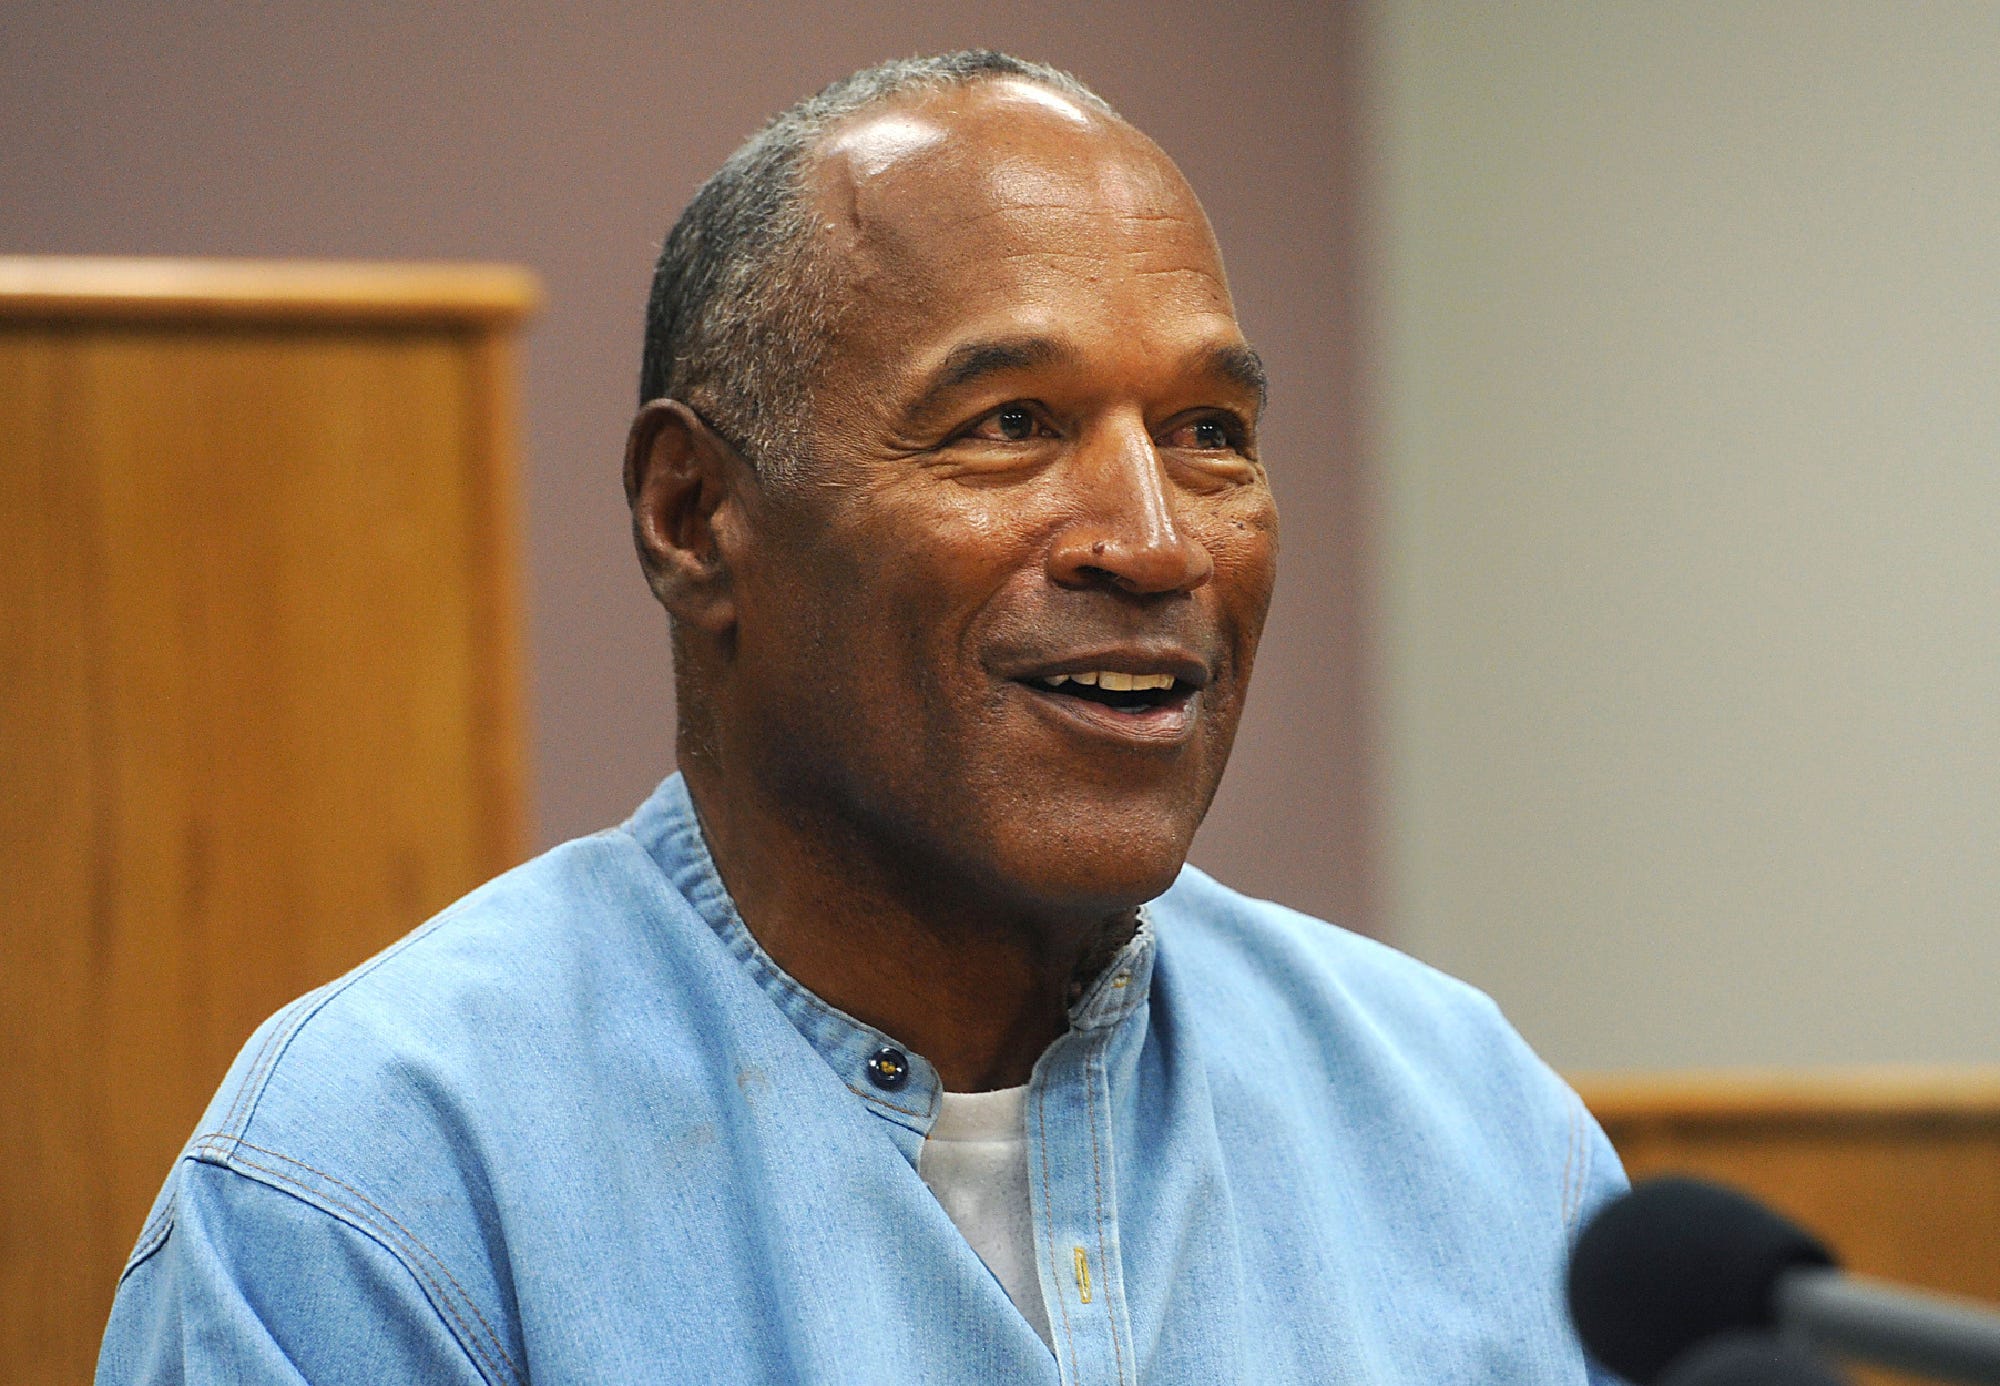 In this July 20, 2017, file photo, former NFL football star O.J. Simpson appears via video for his parole hearing at the Lovelock Correctional Center in Lovelock, Nev. The 74-year-old former football hero, acquitted California murder defendant and convicted Las Vegas armed robber was granted good behavior credits and discharged from parole effective Dec. 1, the day after a hearing before the Nevada state Board of Parole, Kim Yoko Smith, spokeswoman for the Nevada State Police, said Tuesday, Dec. 14, 2021.